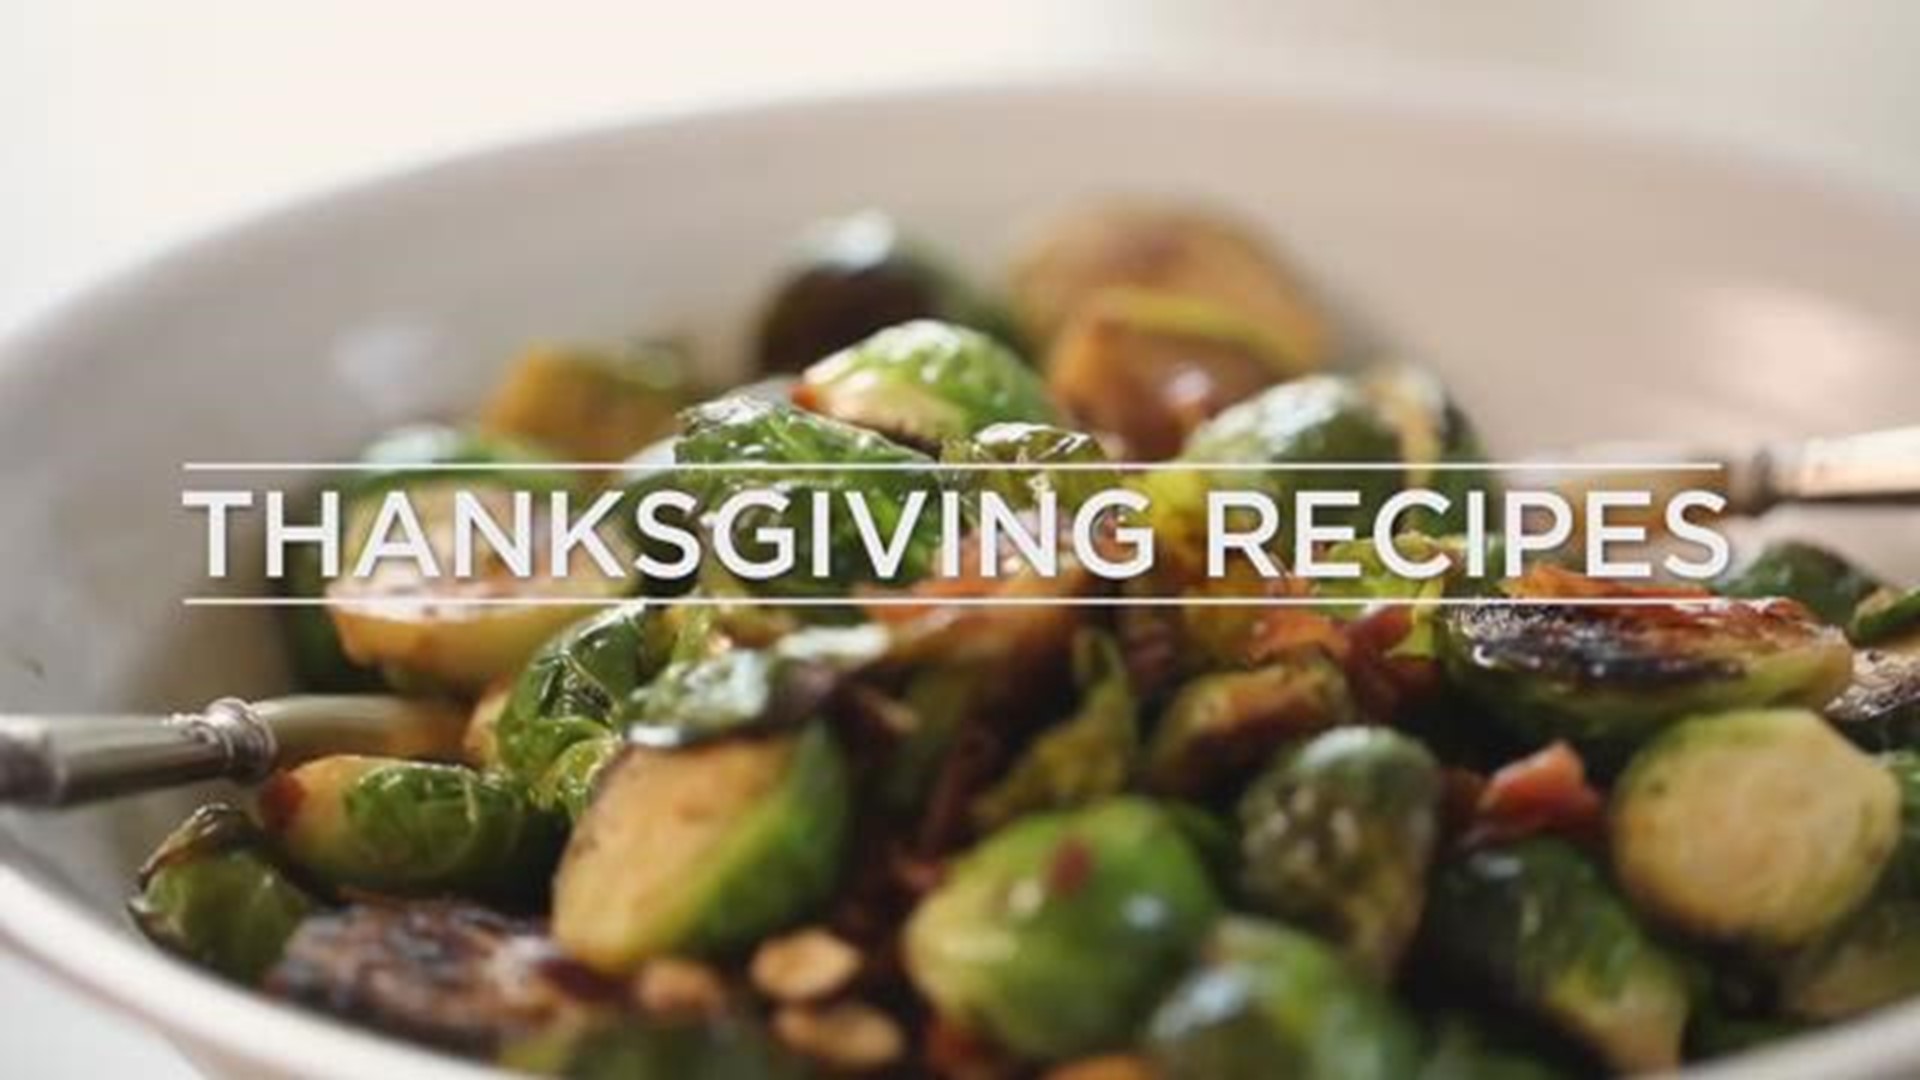 Are you ready for turkey day? Whip up a few of these traditional thanksgiving recipes for your festive feast.